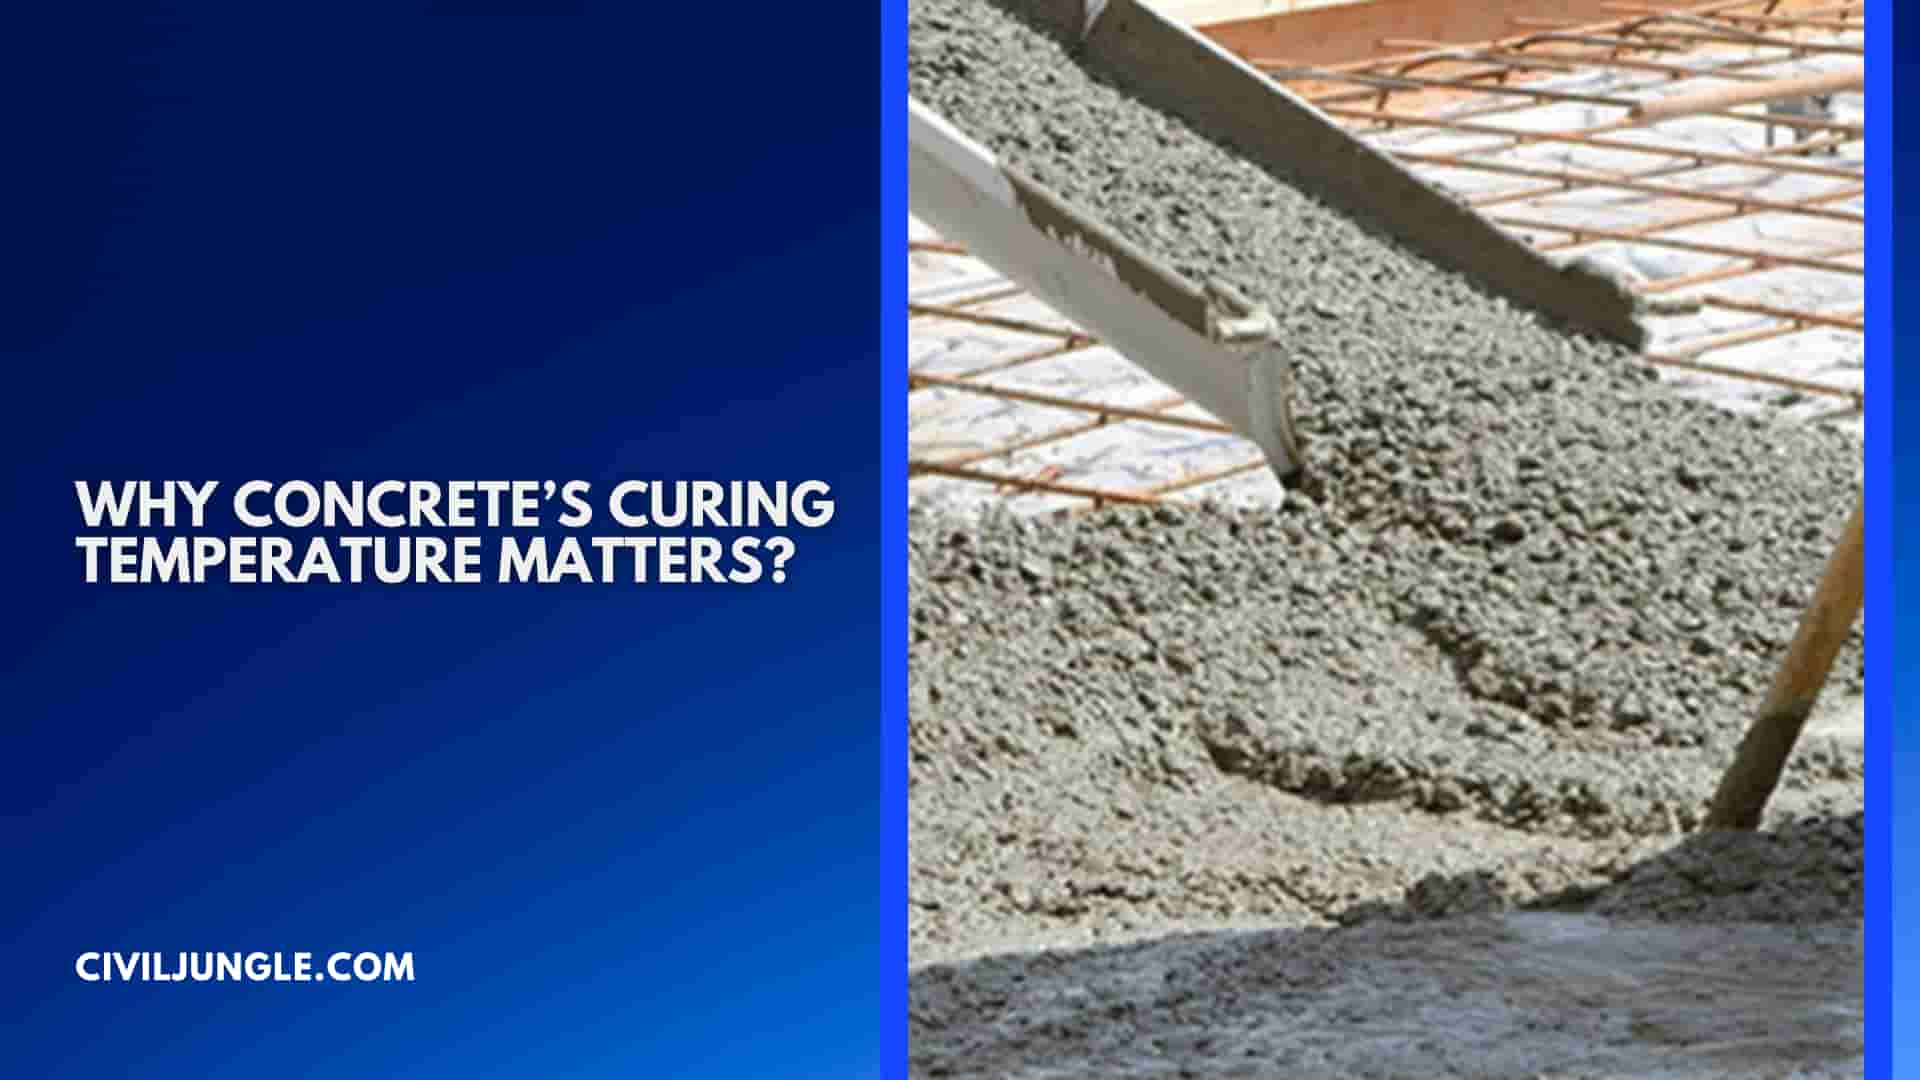 Why Concrete’s Curing Temperature Matters?